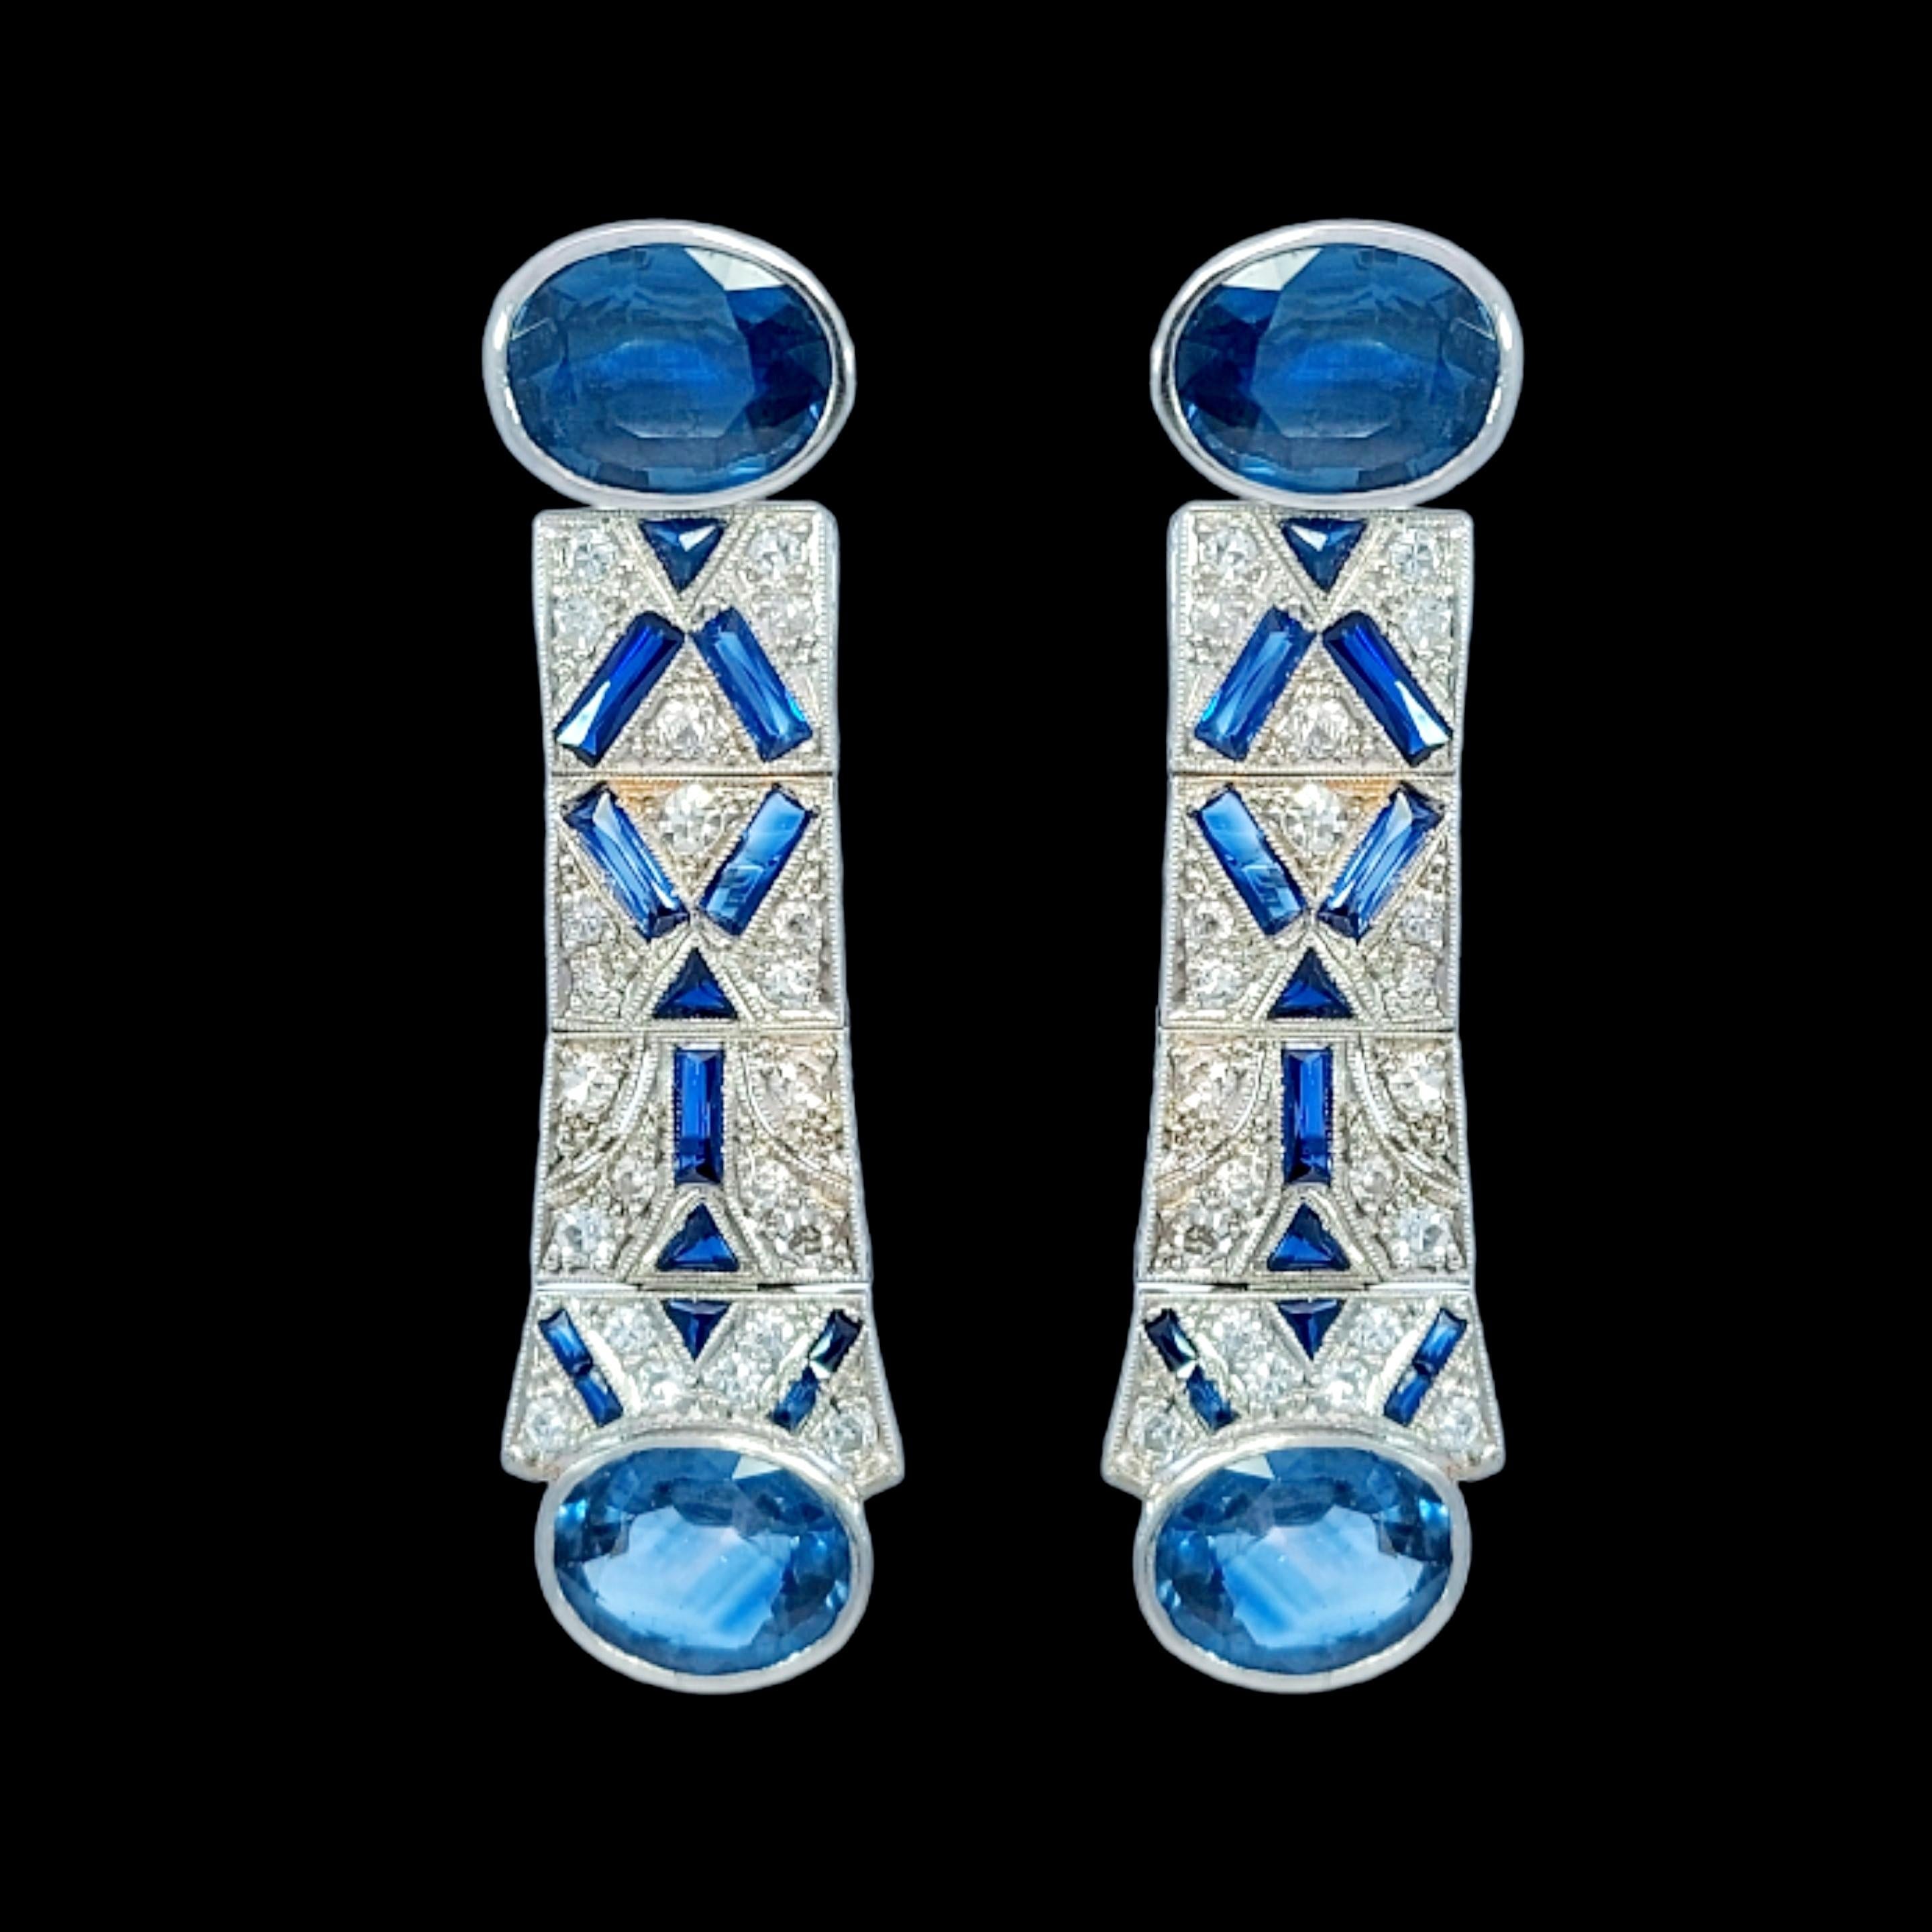 Platinum Earrings with Sapphires and Diamonds

Sapphire: 4 oval cut sapphires, baguette cut, triangle cut : 12 Carats

Diamonds: 22 brilliant cut diamonds together approx. 1.3 ct diamonds

Material: Platinum

Measurements: 45.6 mm x 12.8 mm x 3.6